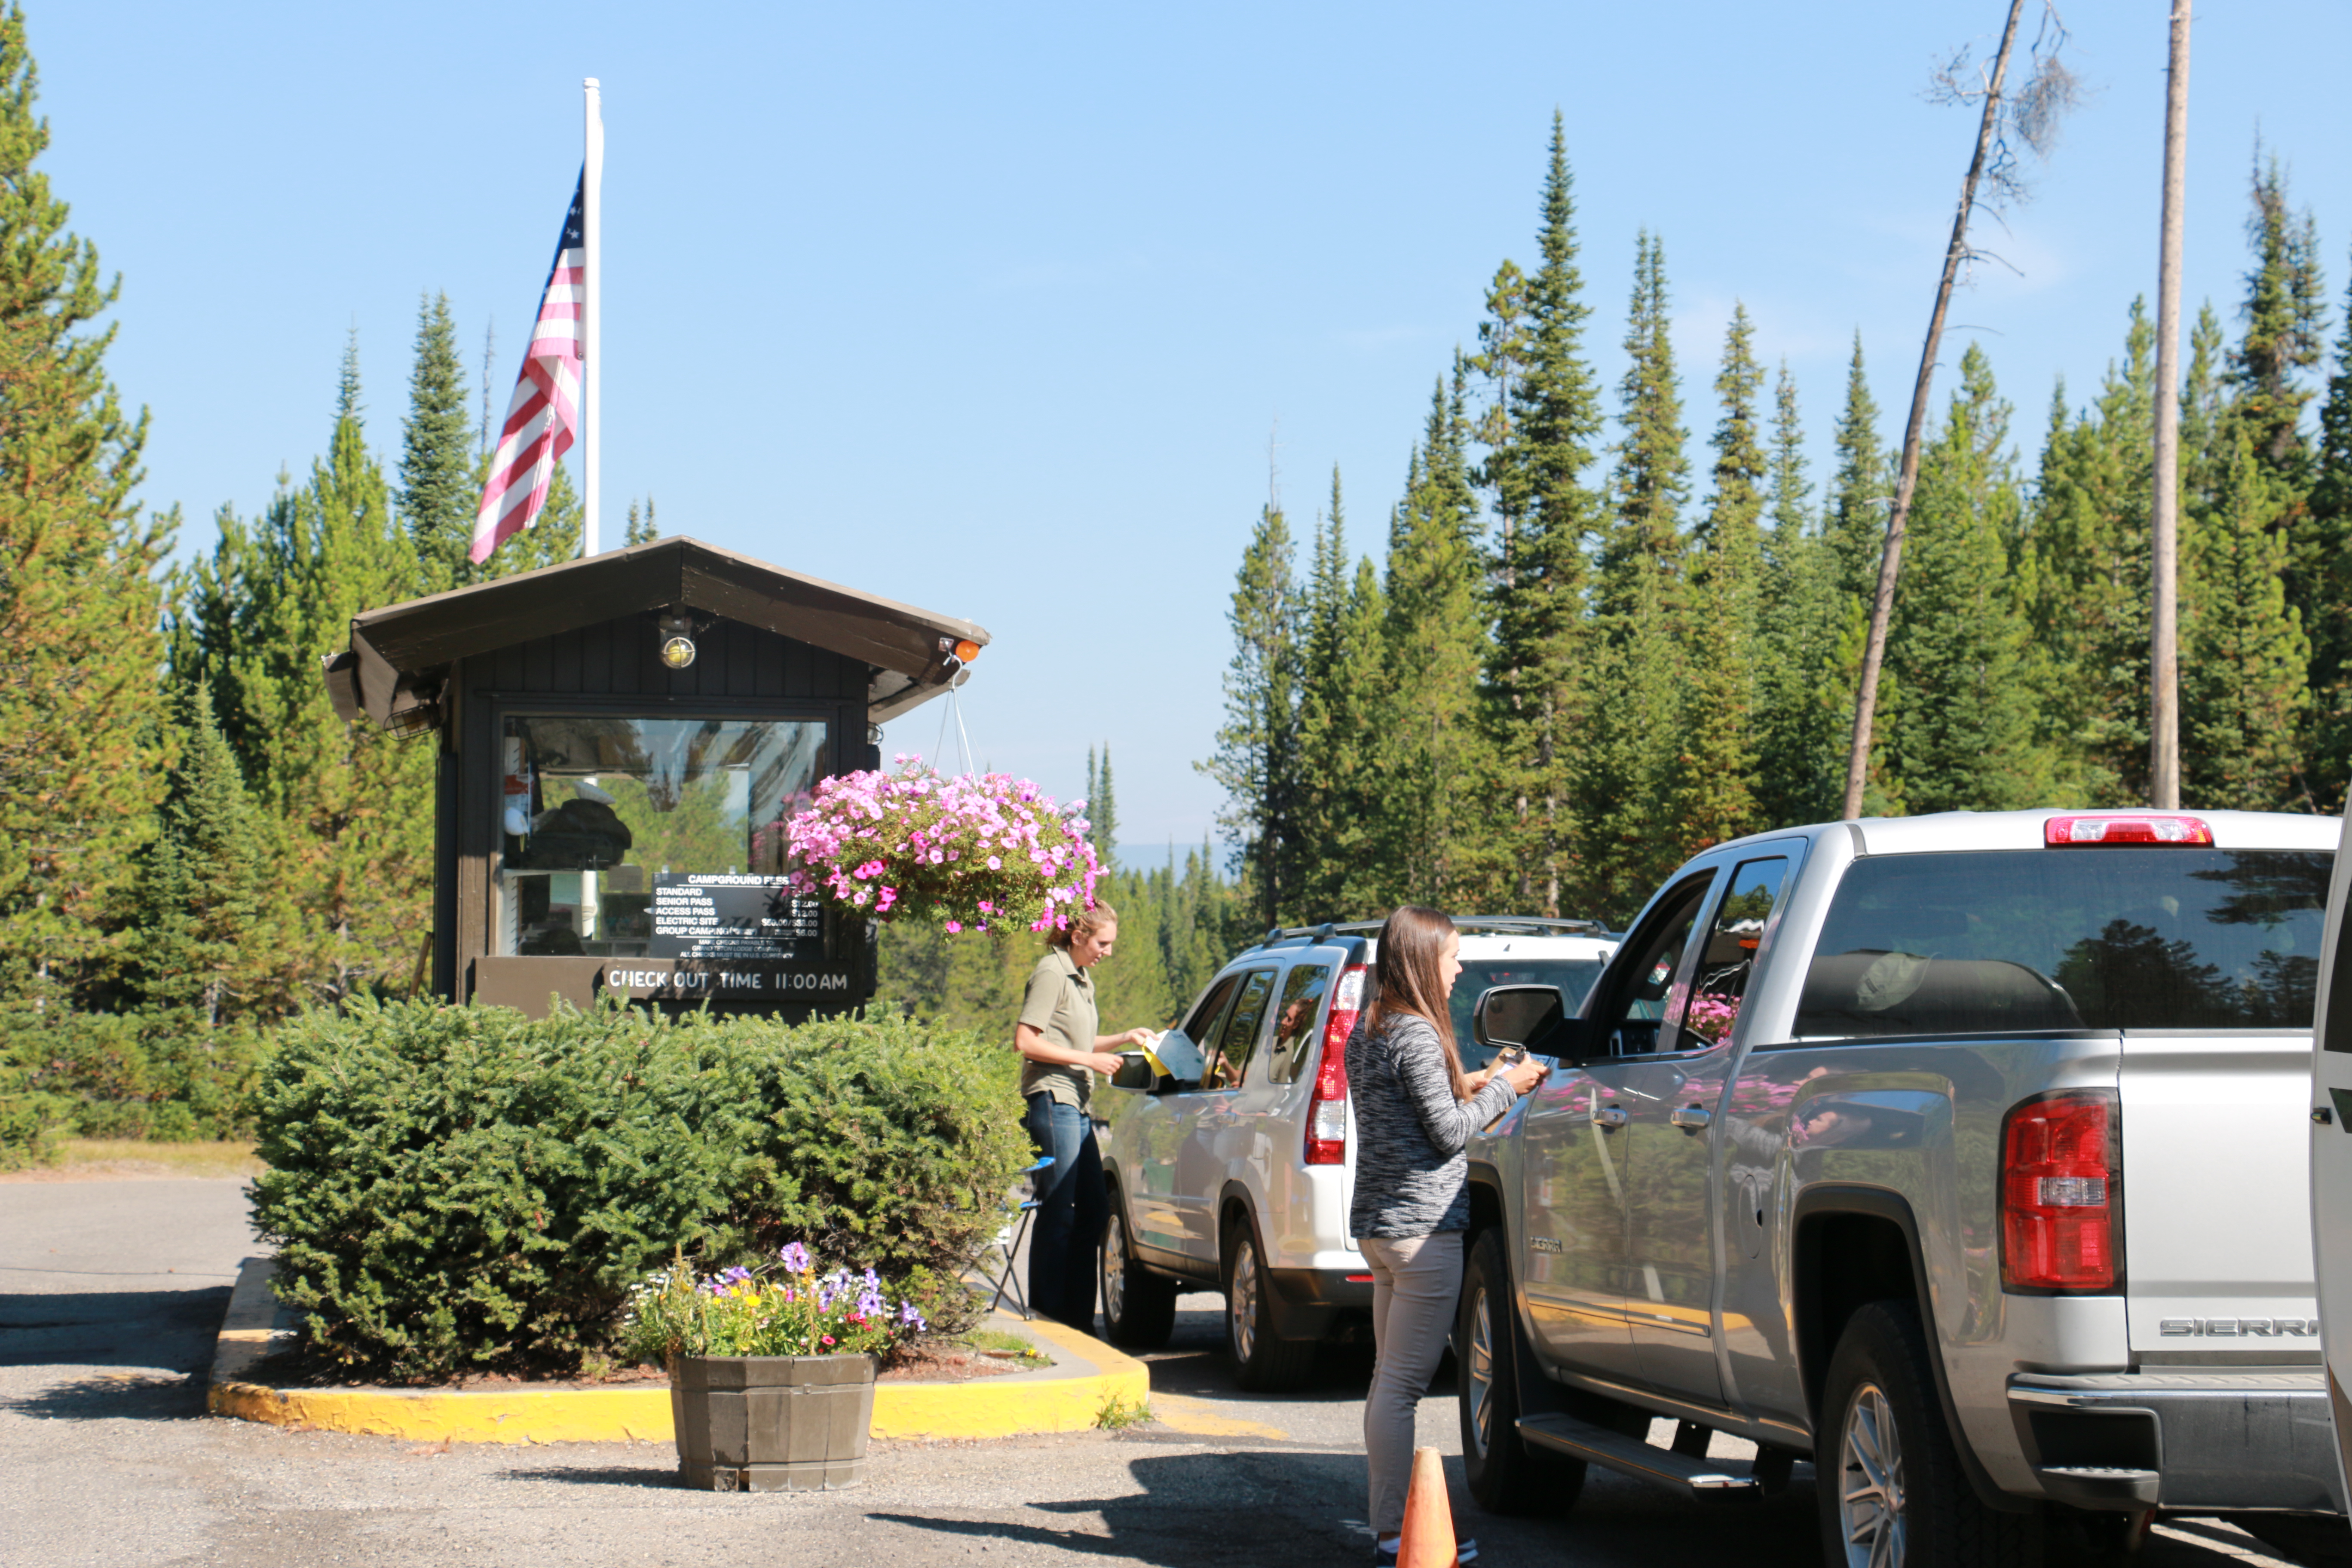 vehicles waiting to pay camping fees at entrance booth to campground